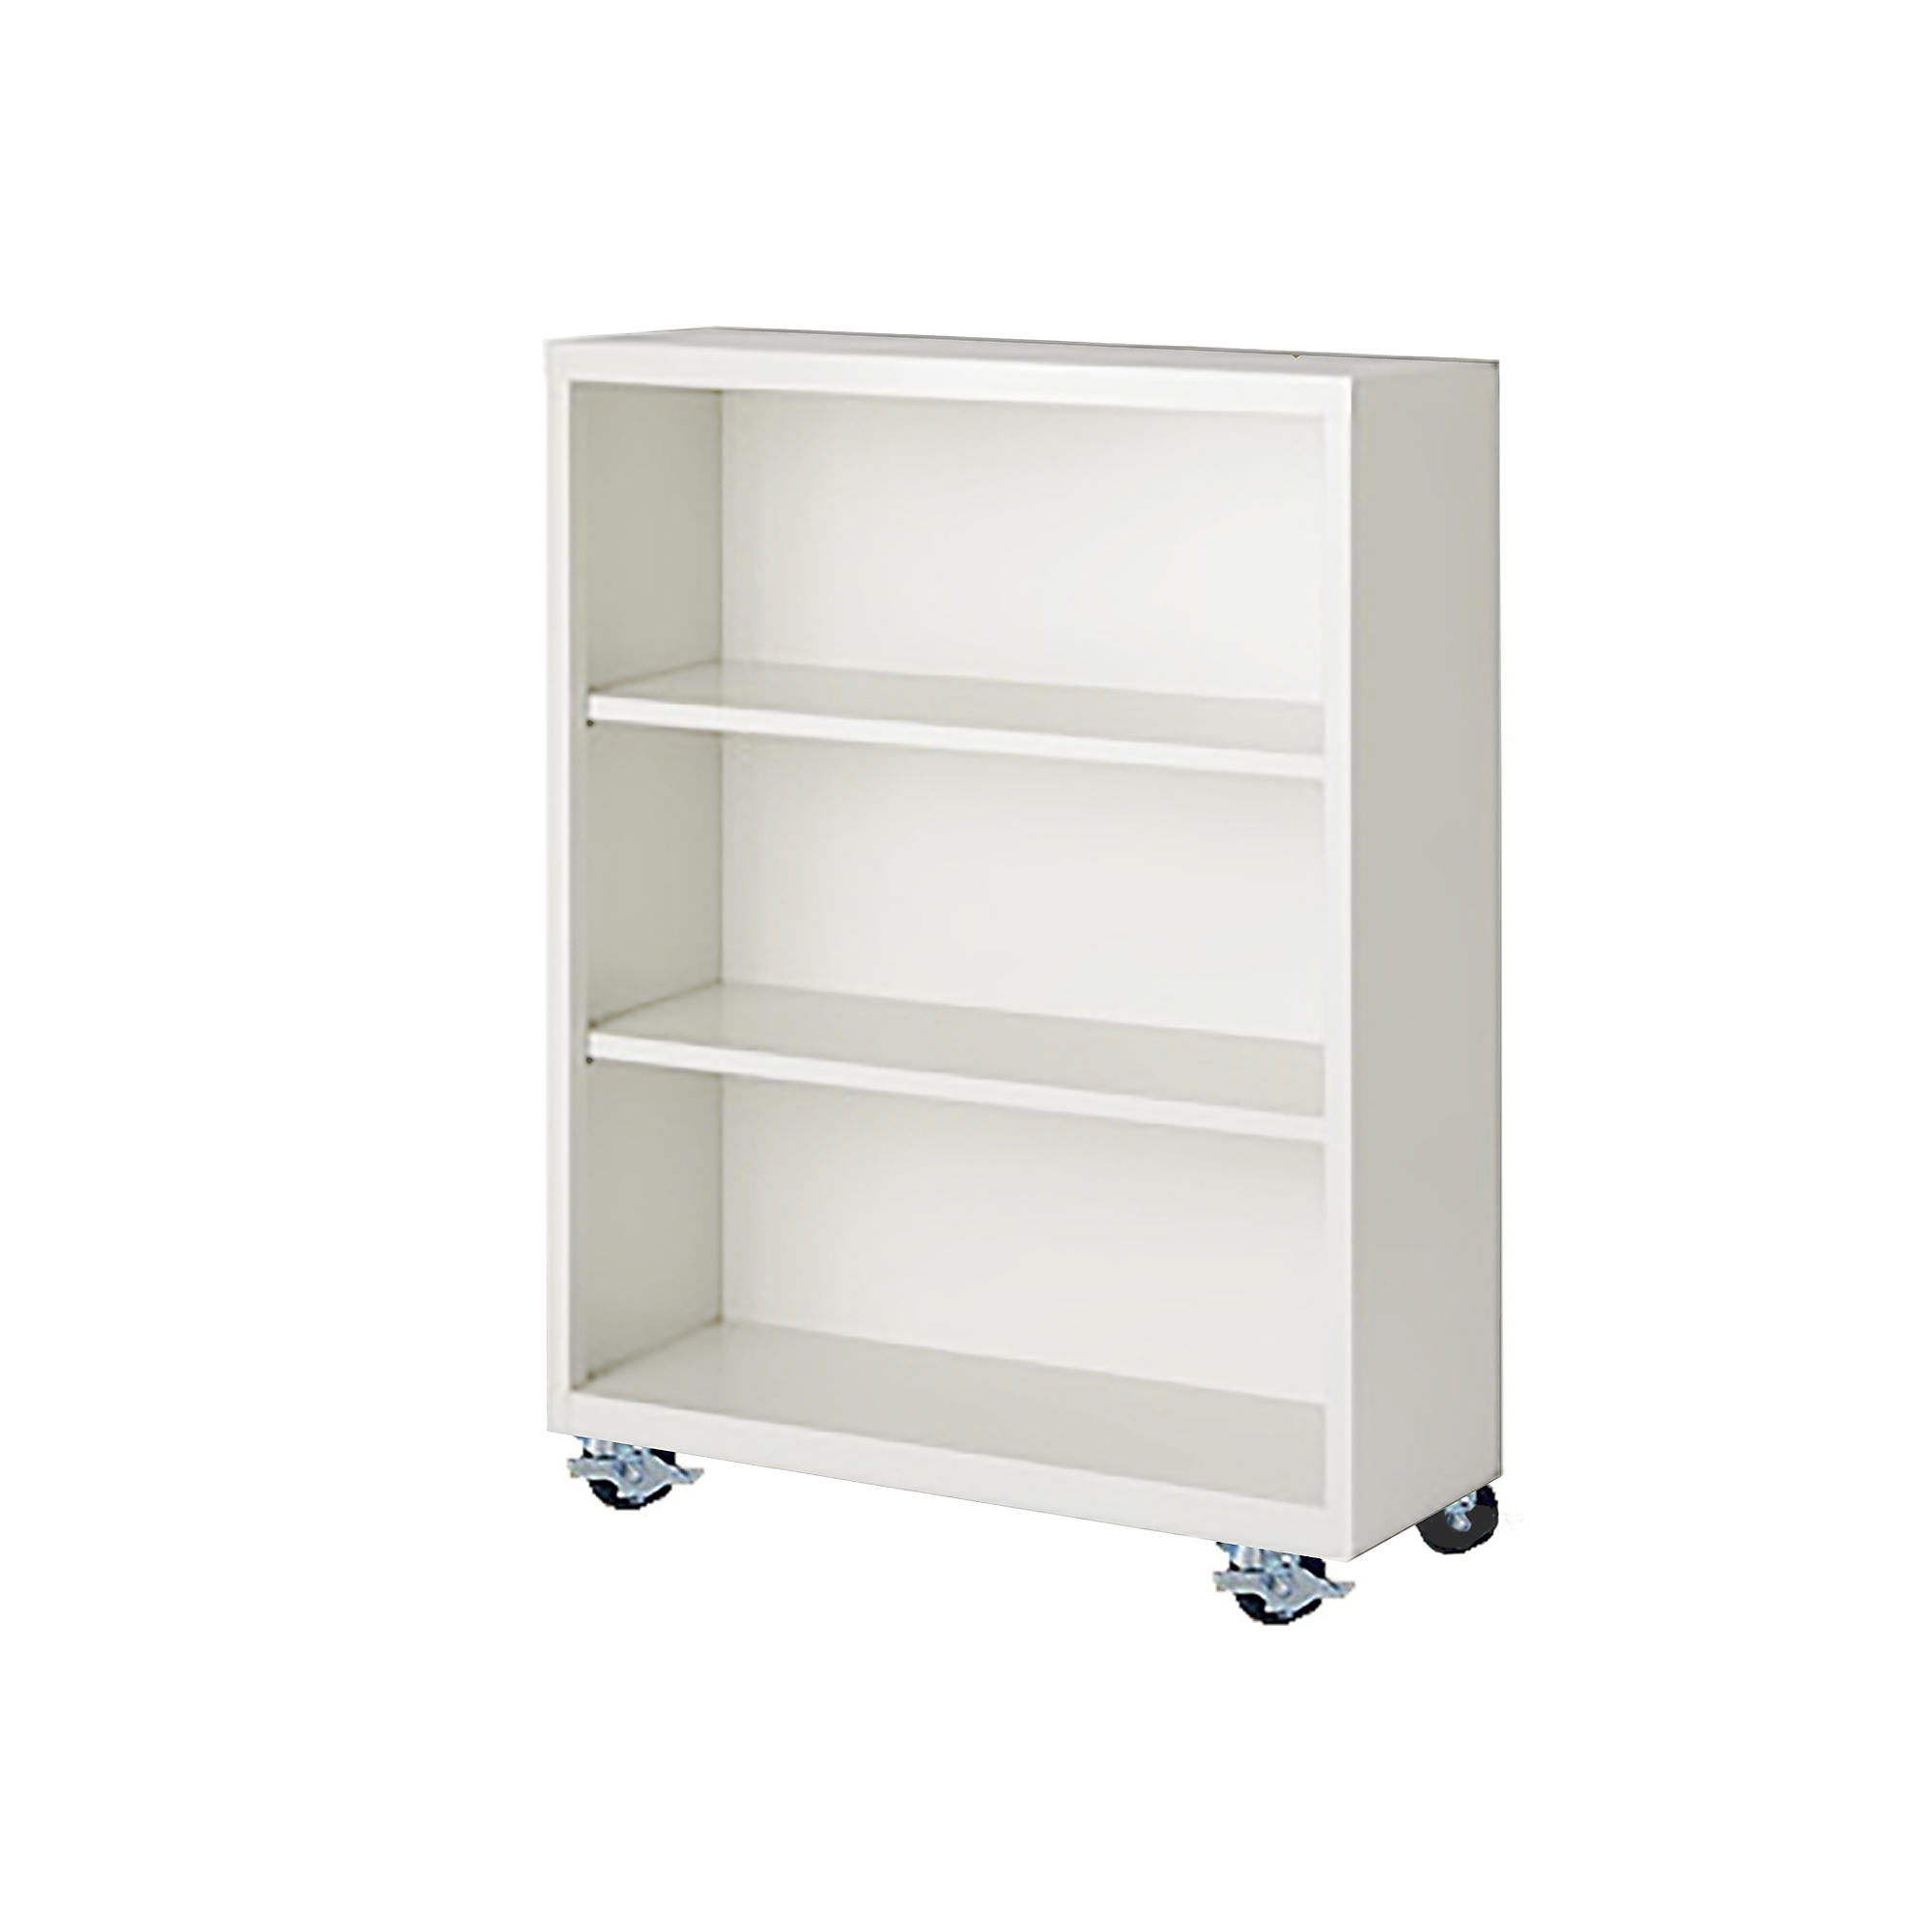 Steel Cabinets USA, 36Inchx18Inchx45Inch Putty Mobile Bookcase Fully Assembled, Height 45 in, Shelves (qty.) 3, Material Steel, Model MBCA-364518-P